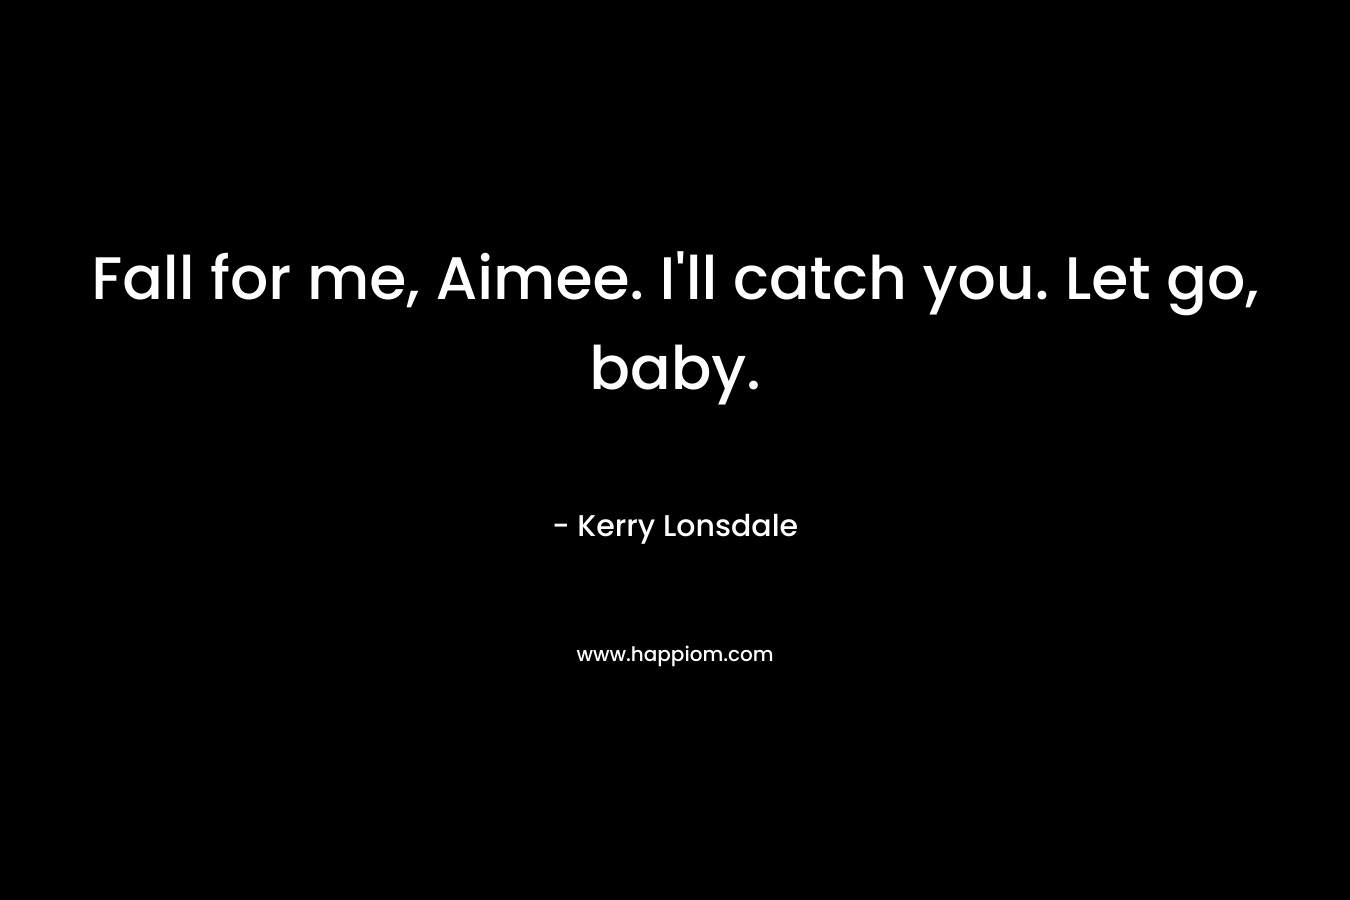 Fall for me, Aimee. I'll catch you. Let go, baby.